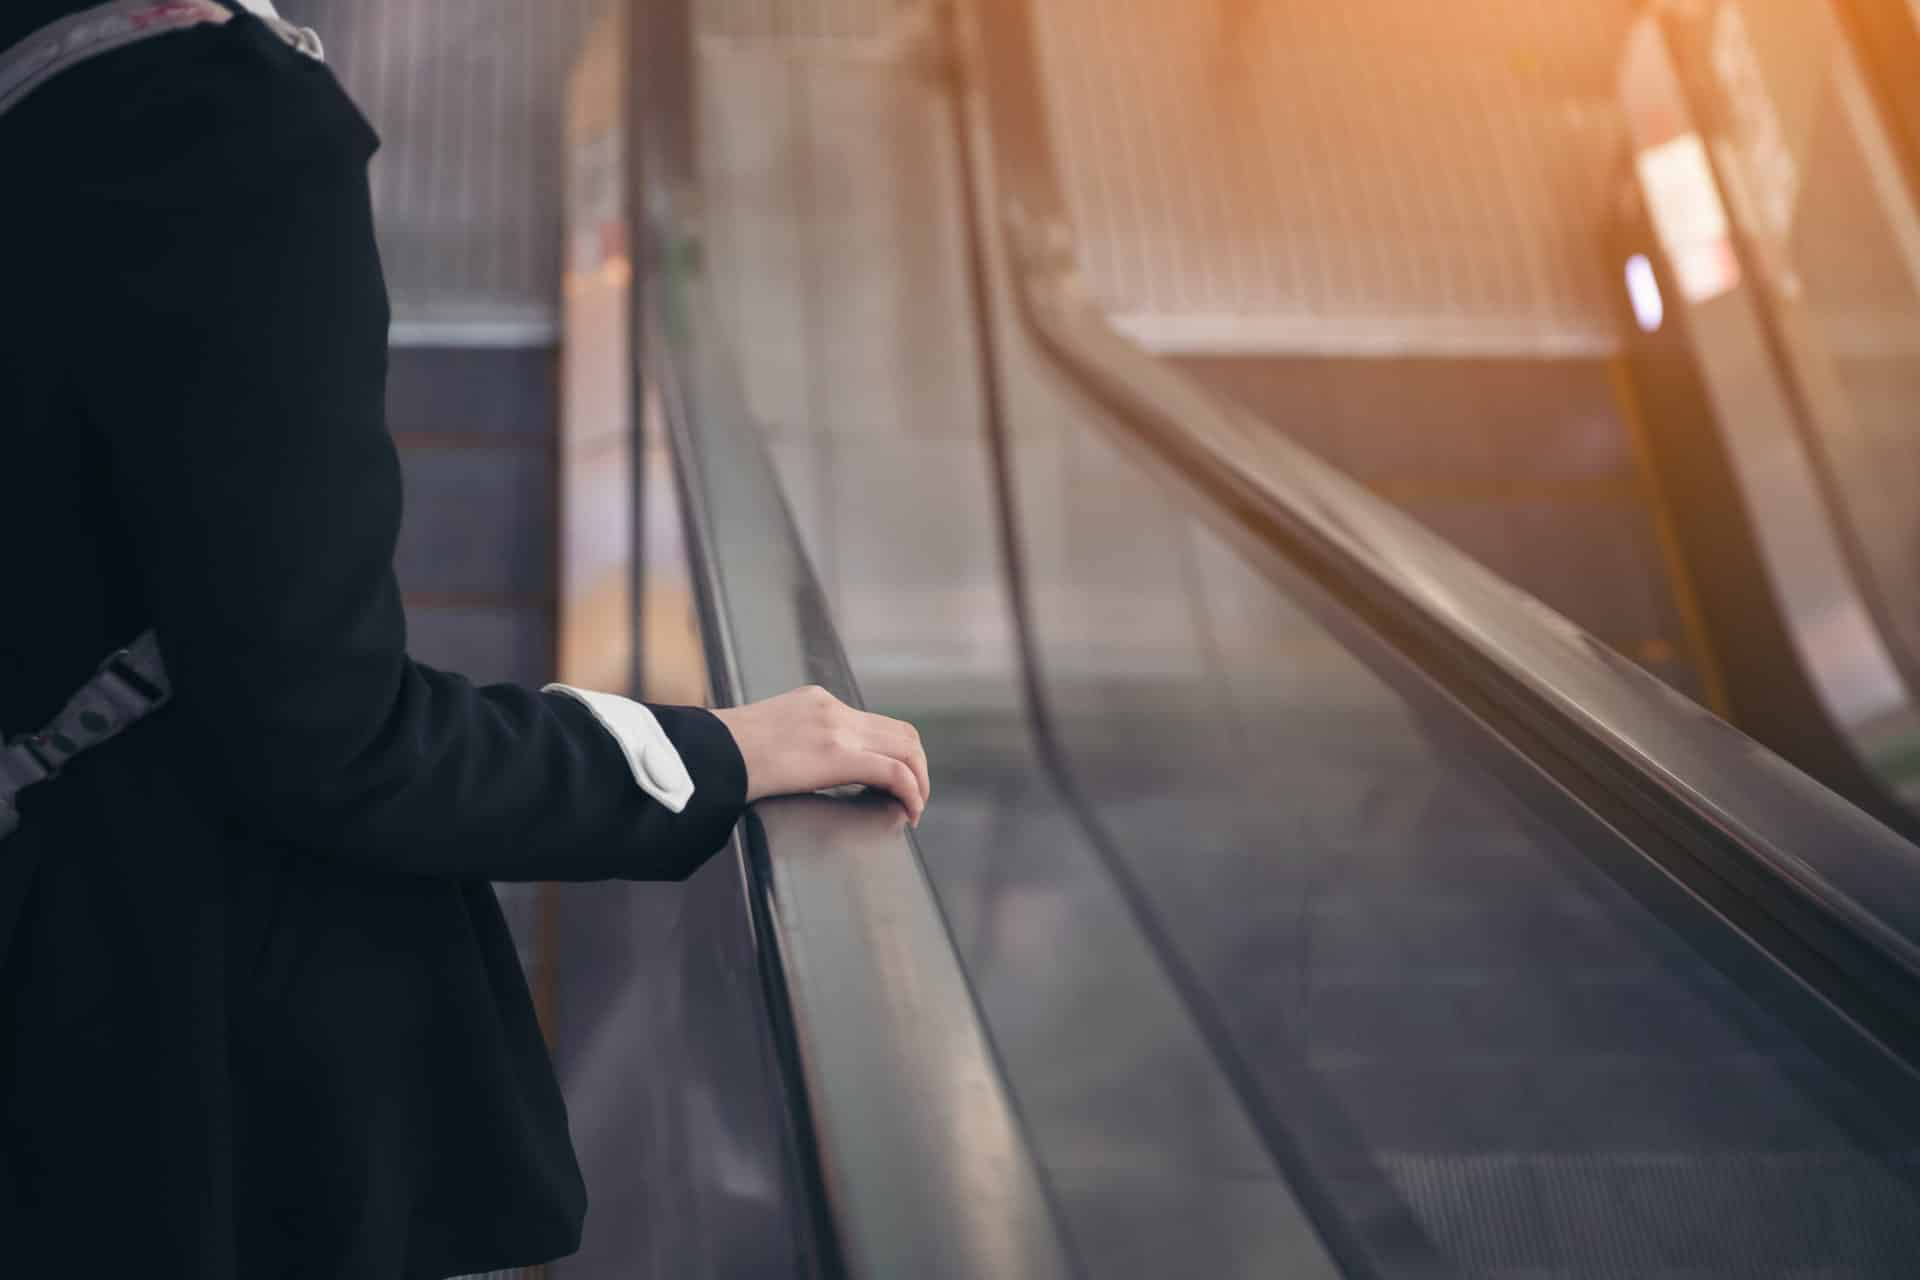 What Type of Escalator Accidents Occur?